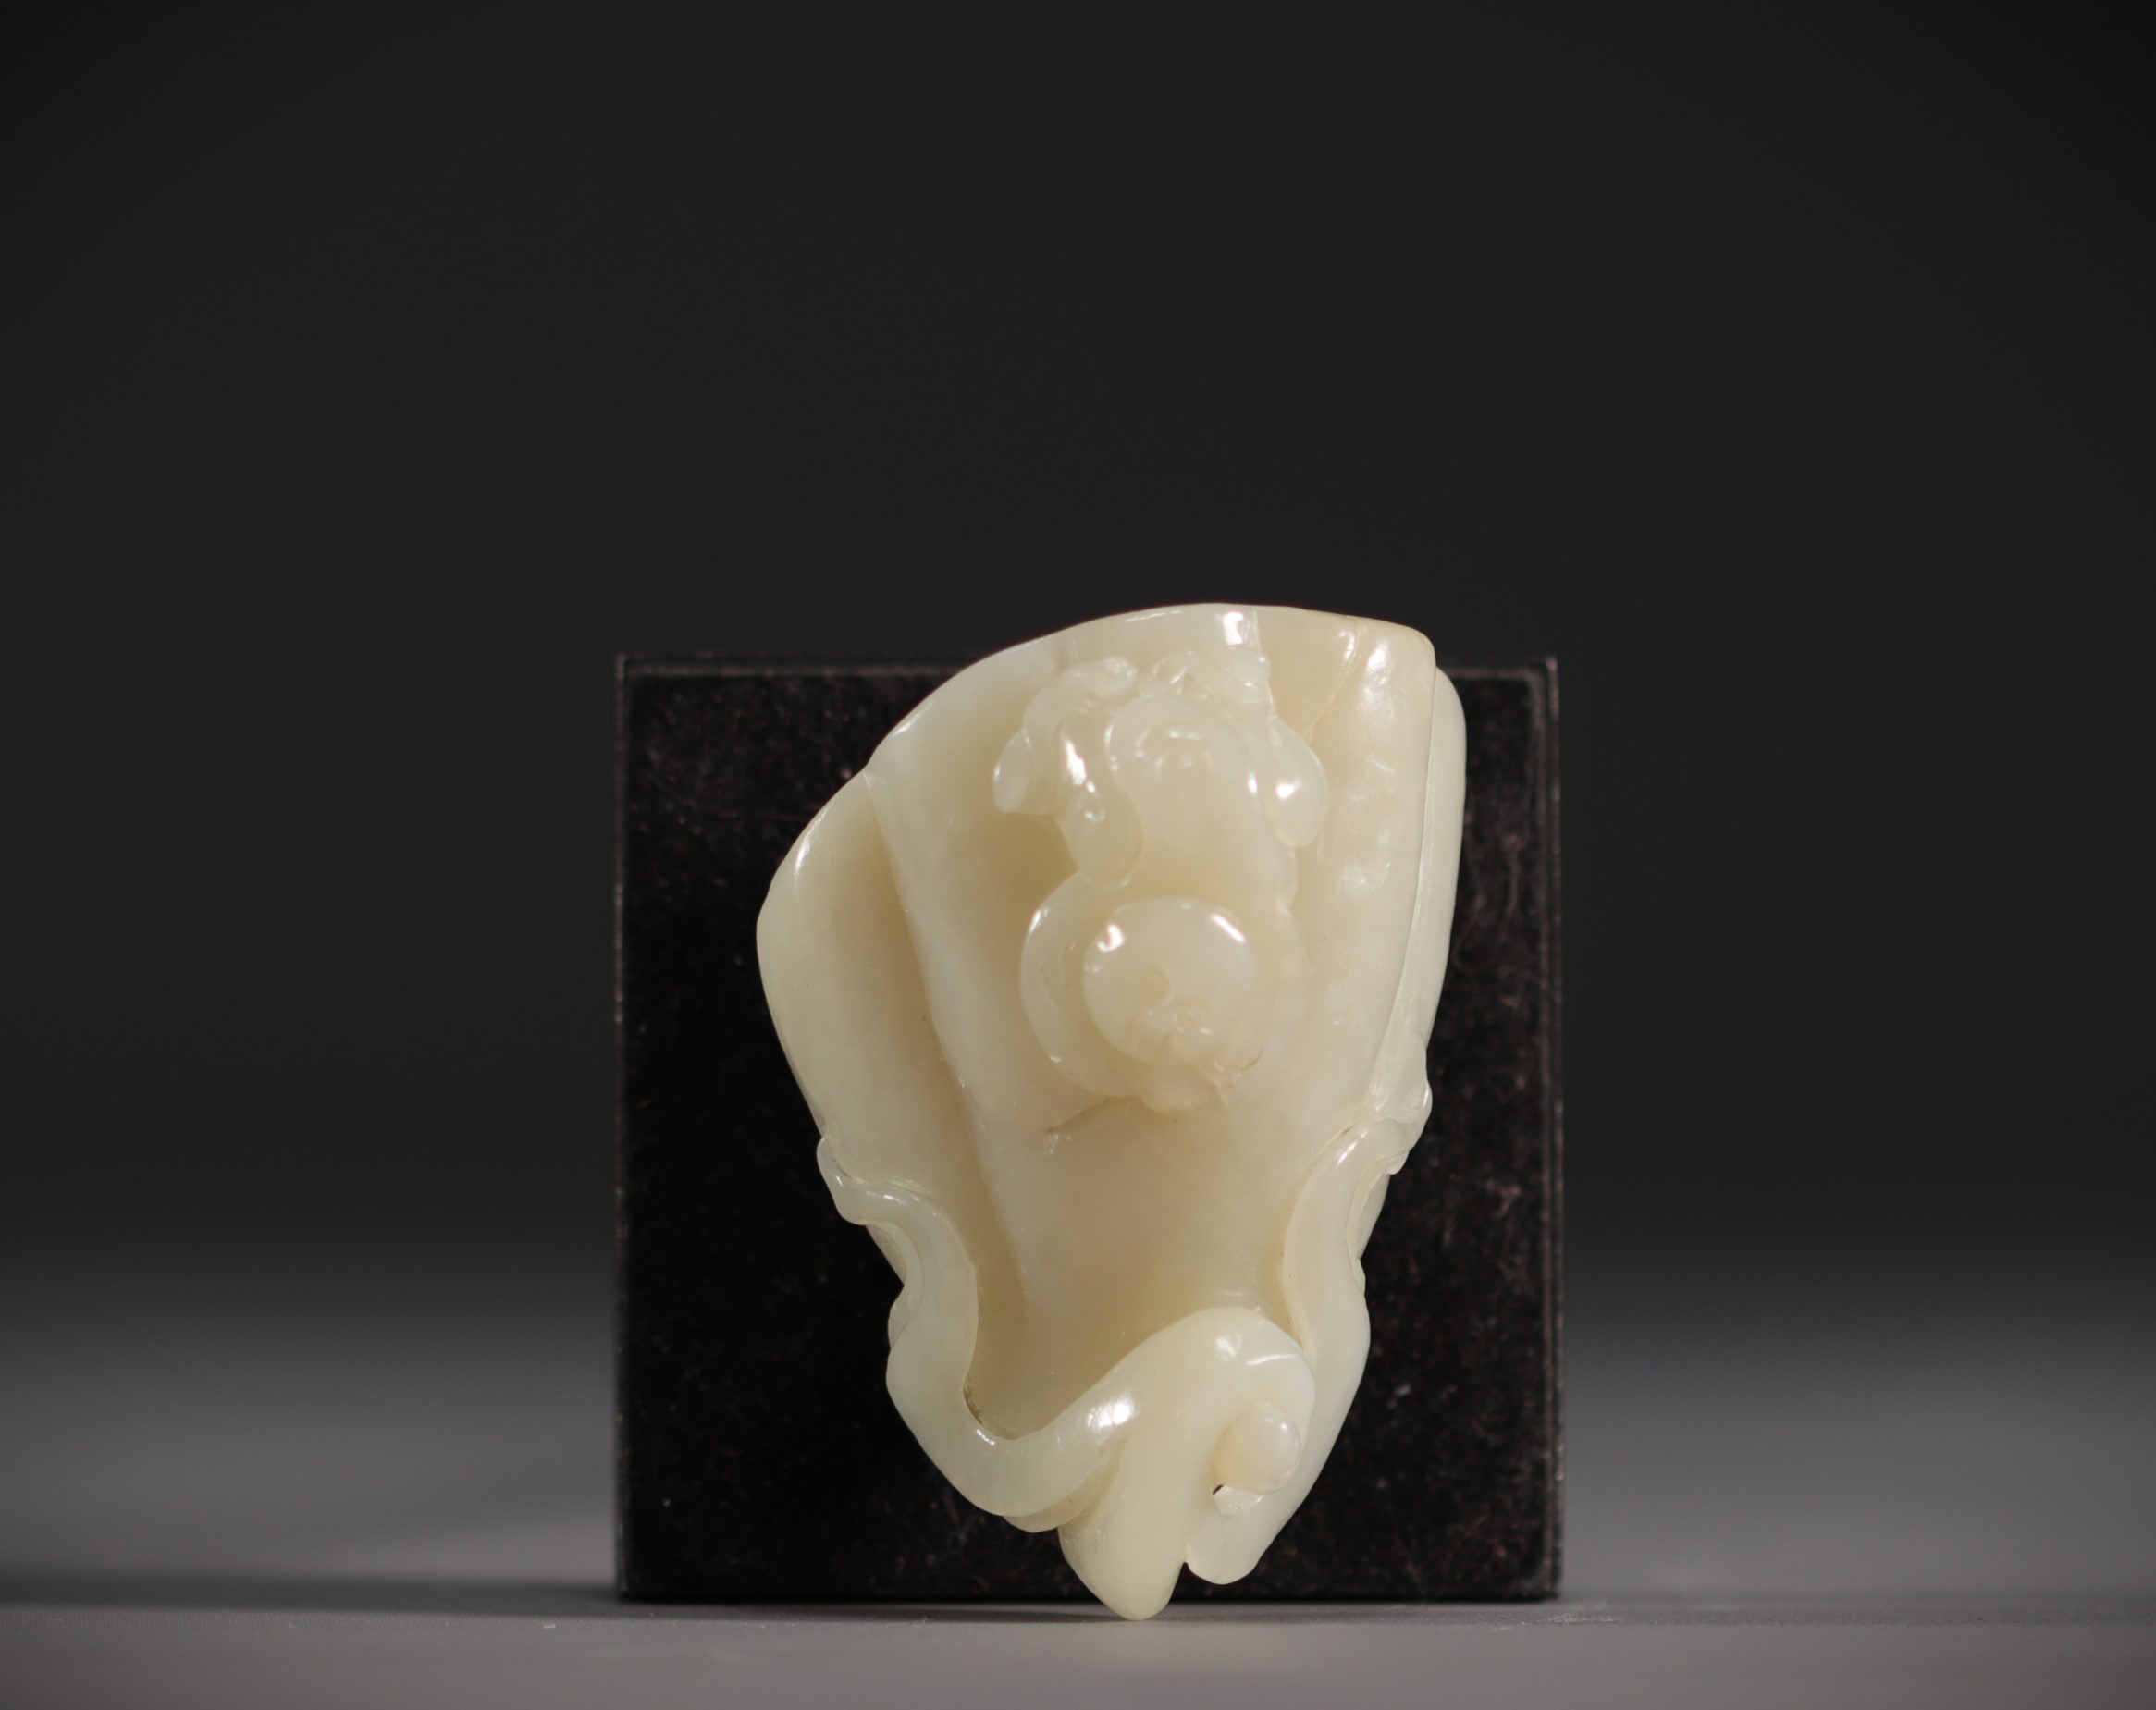 China - White jade pendant in the shape of a fruit surmounted by a young child. - Image 4 of 6